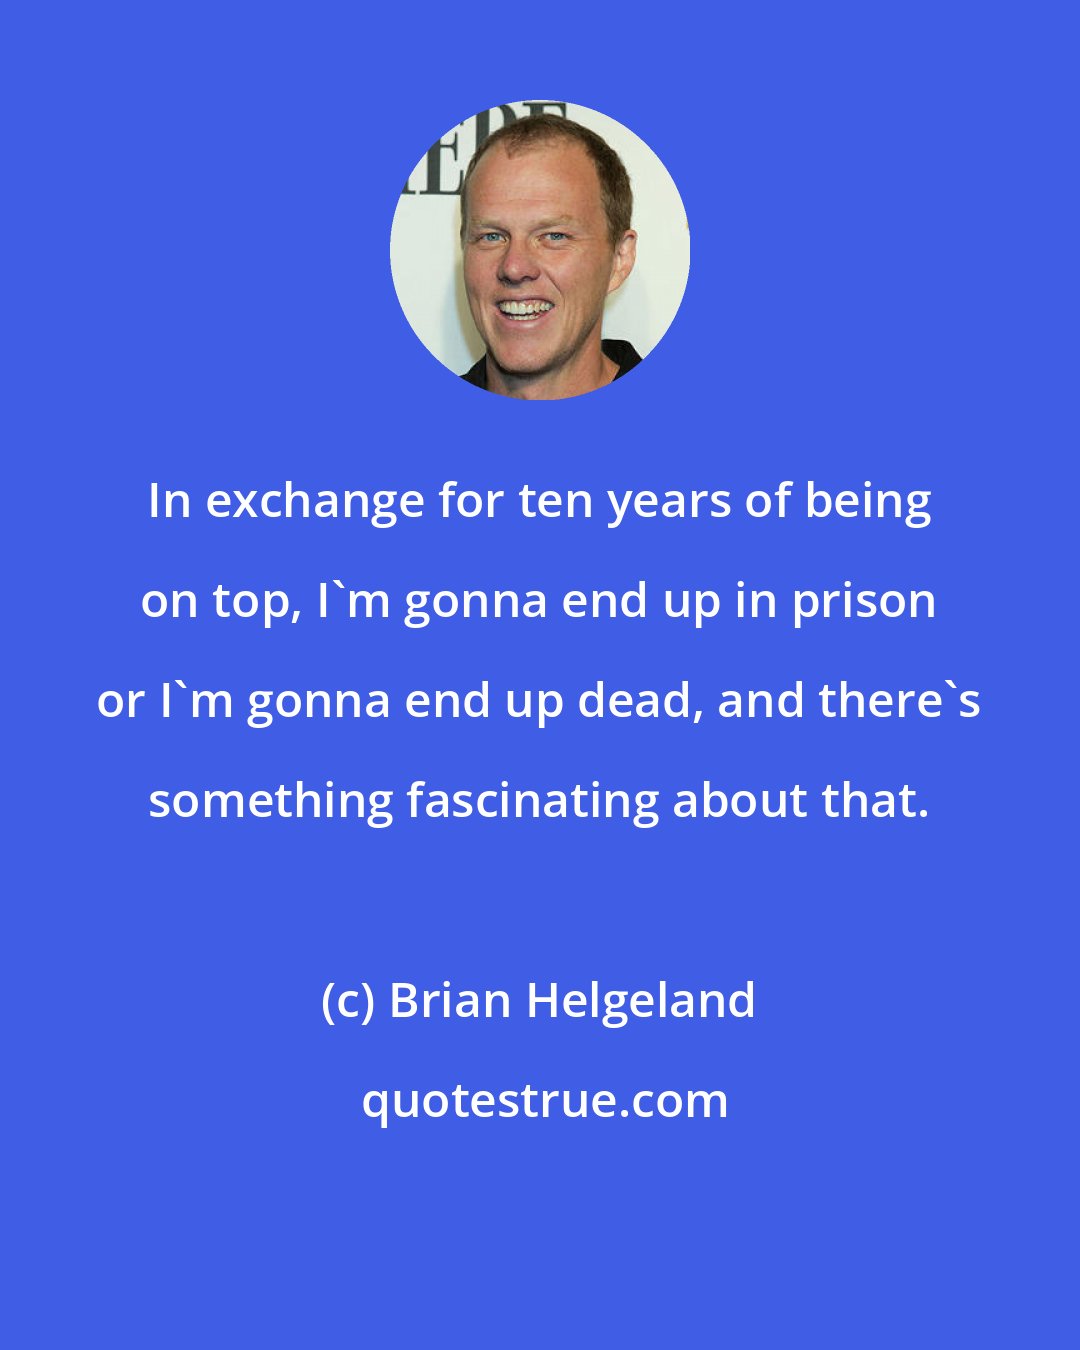 Brian Helgeland: In exchange for ten years of being on top, I'm gonna end up in prison or I'm gonna end up dead, and there's something fascinating about that.